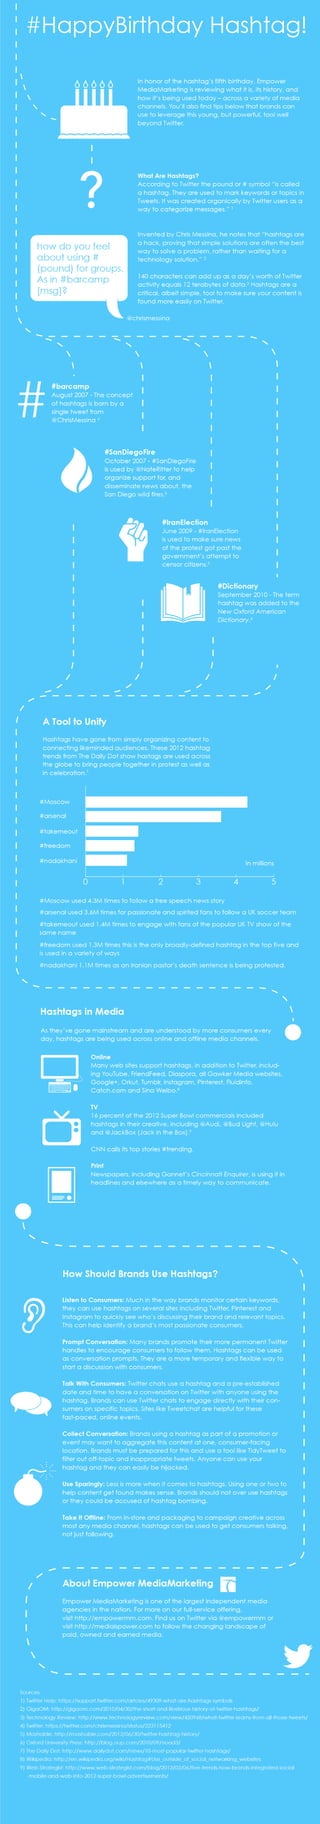 History of the Twitter Hashtag Infographic